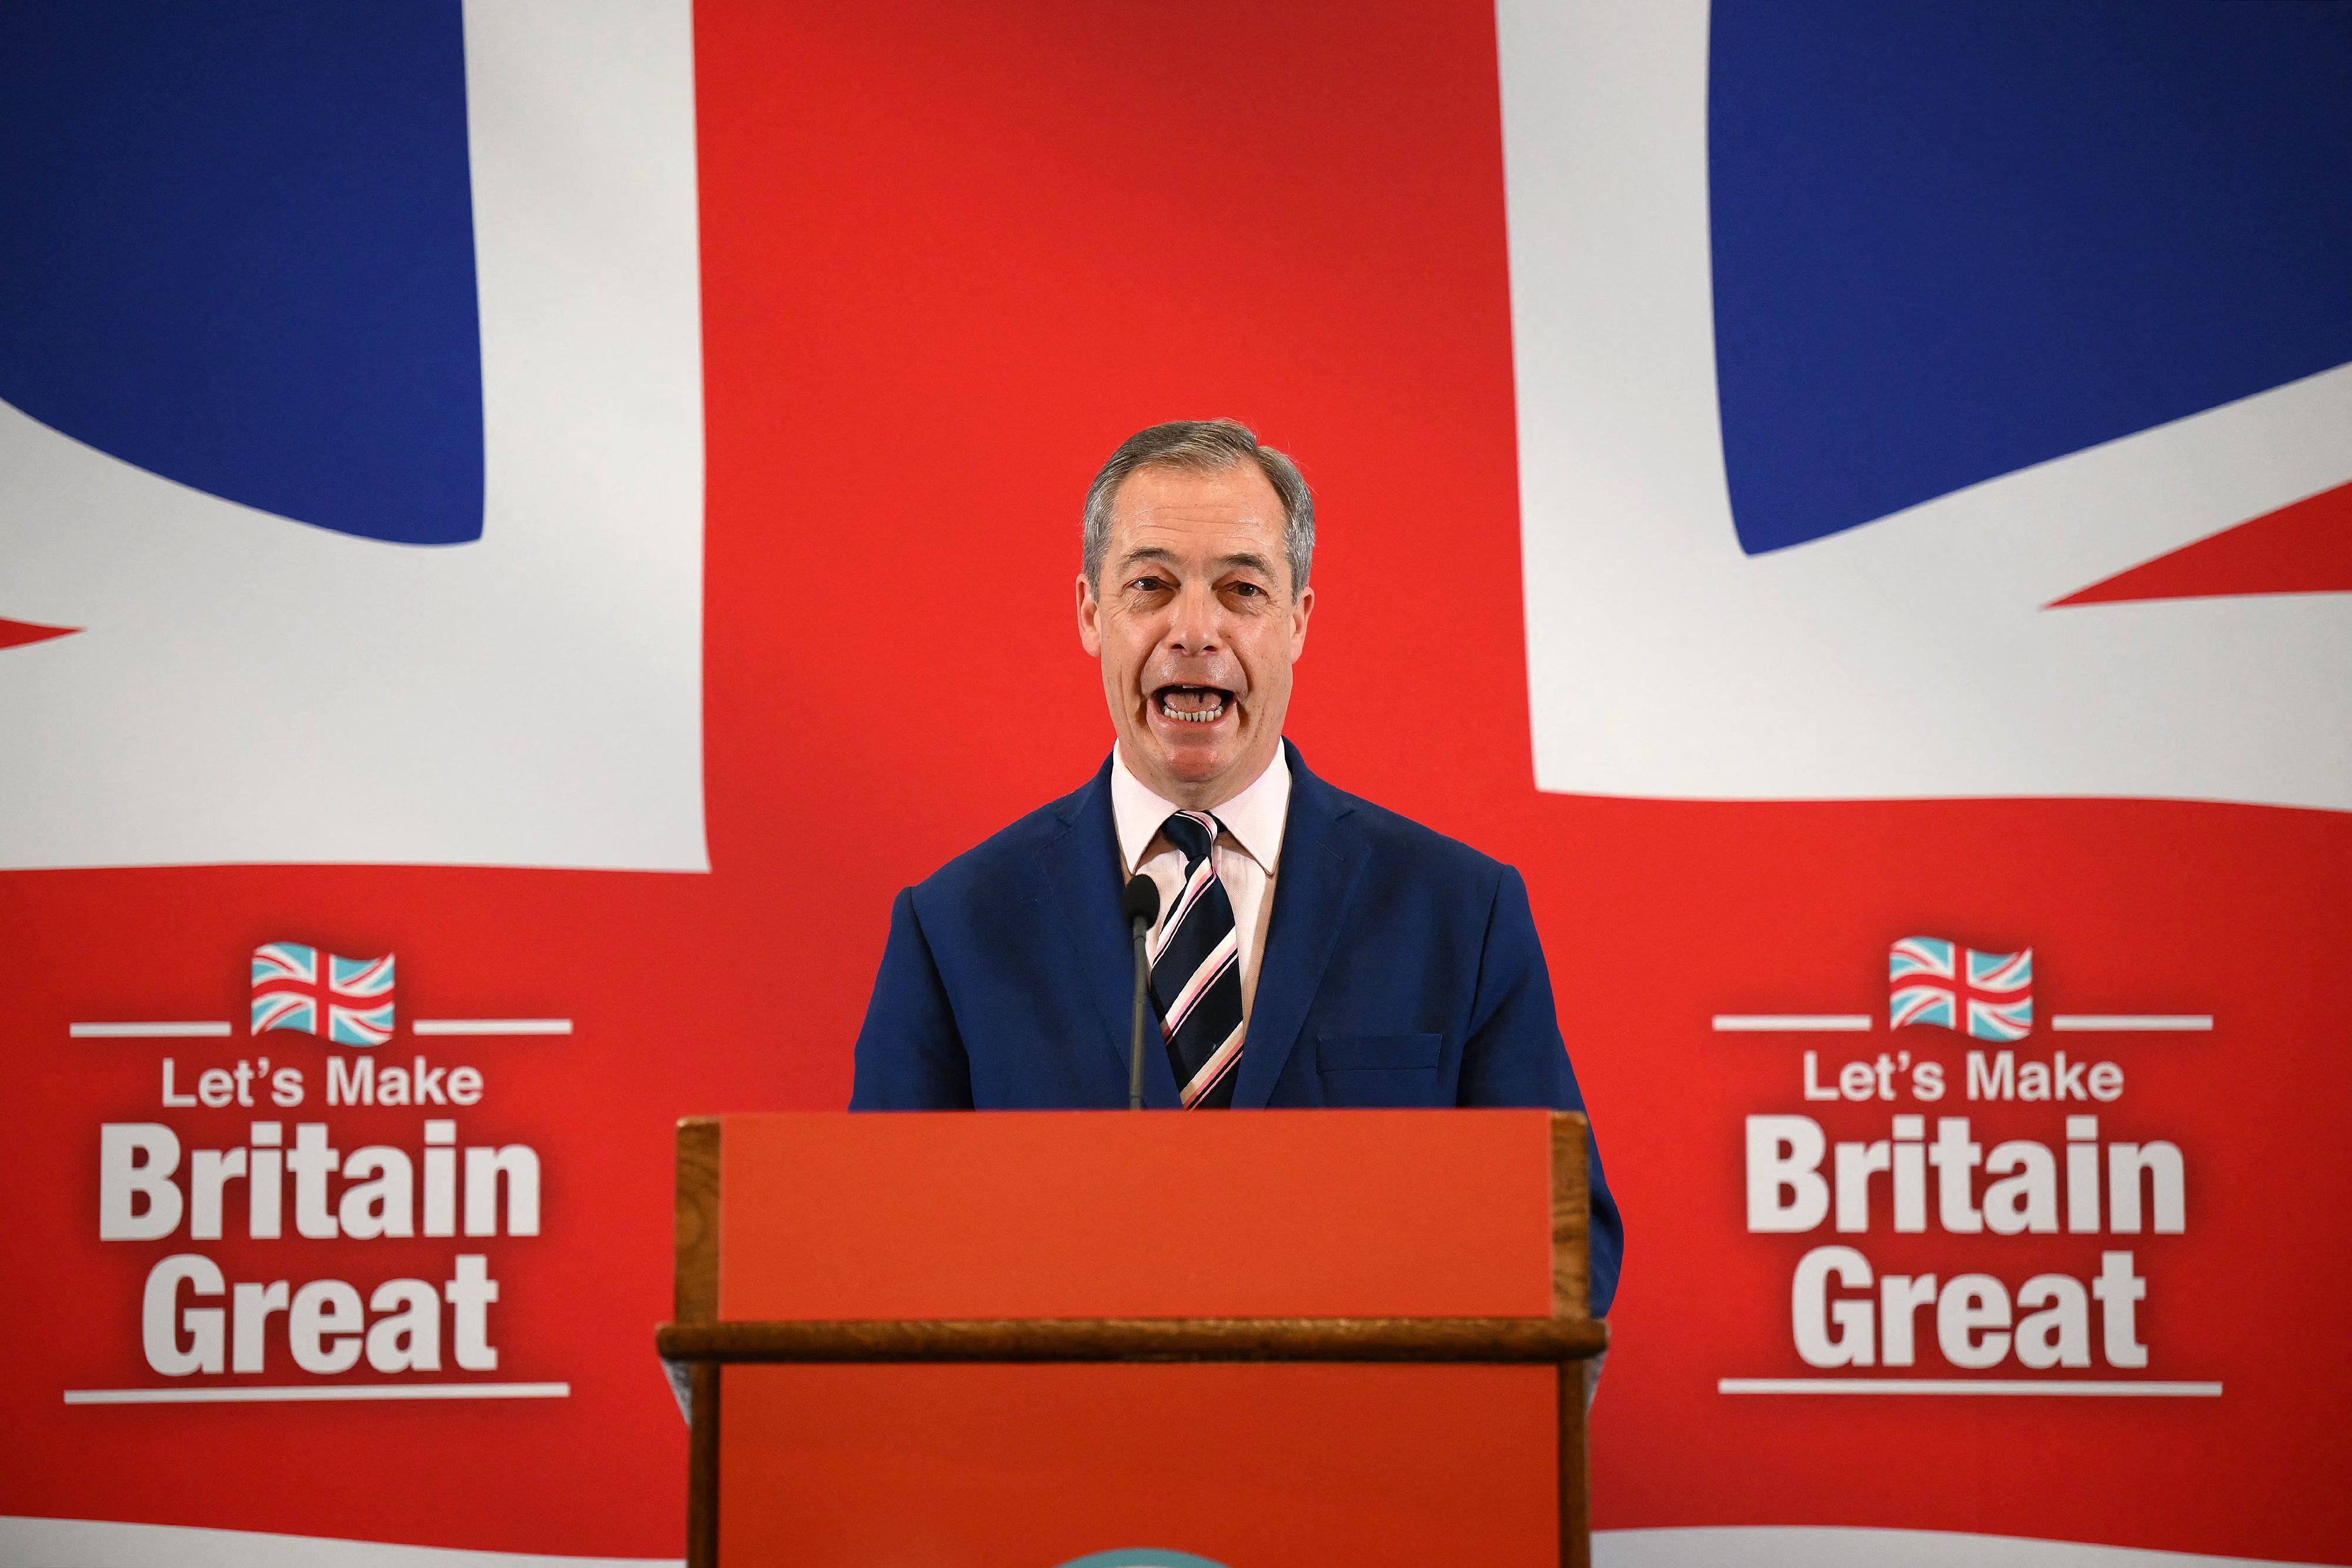 Nigel Farage has said he would be ‘very surprised if I were not Conservative leader by 2026’. File photo: AFP